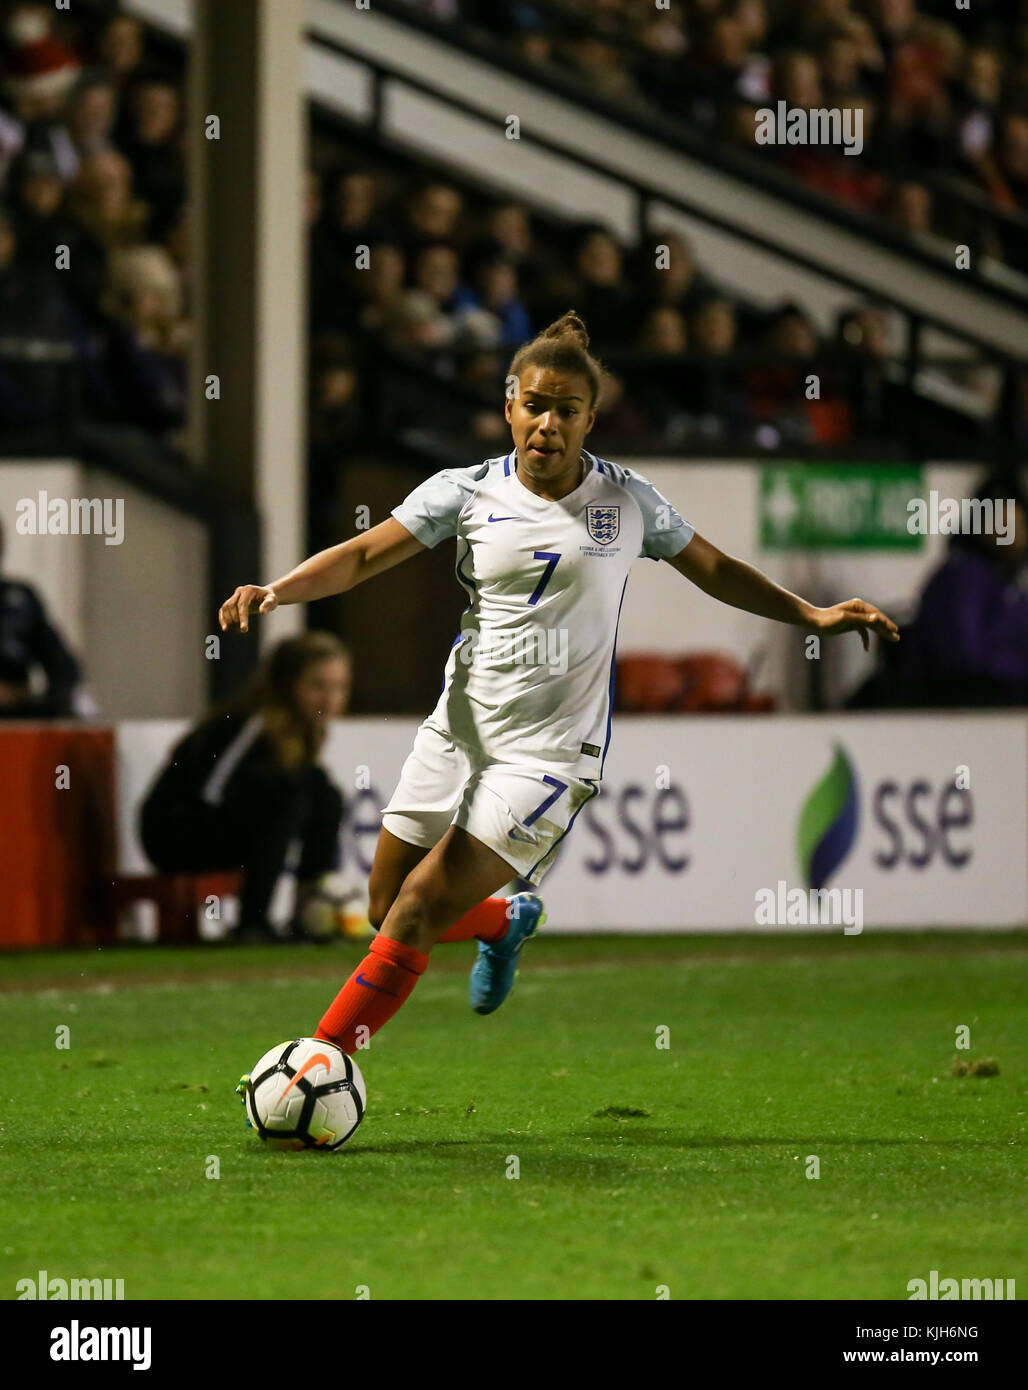 England Women's team, the Lionesses, playing Bosnia & Herzegovina, FIFA Women's World Cup qualifying round, November 2017. Nikita Parris on the ball Stock Photo